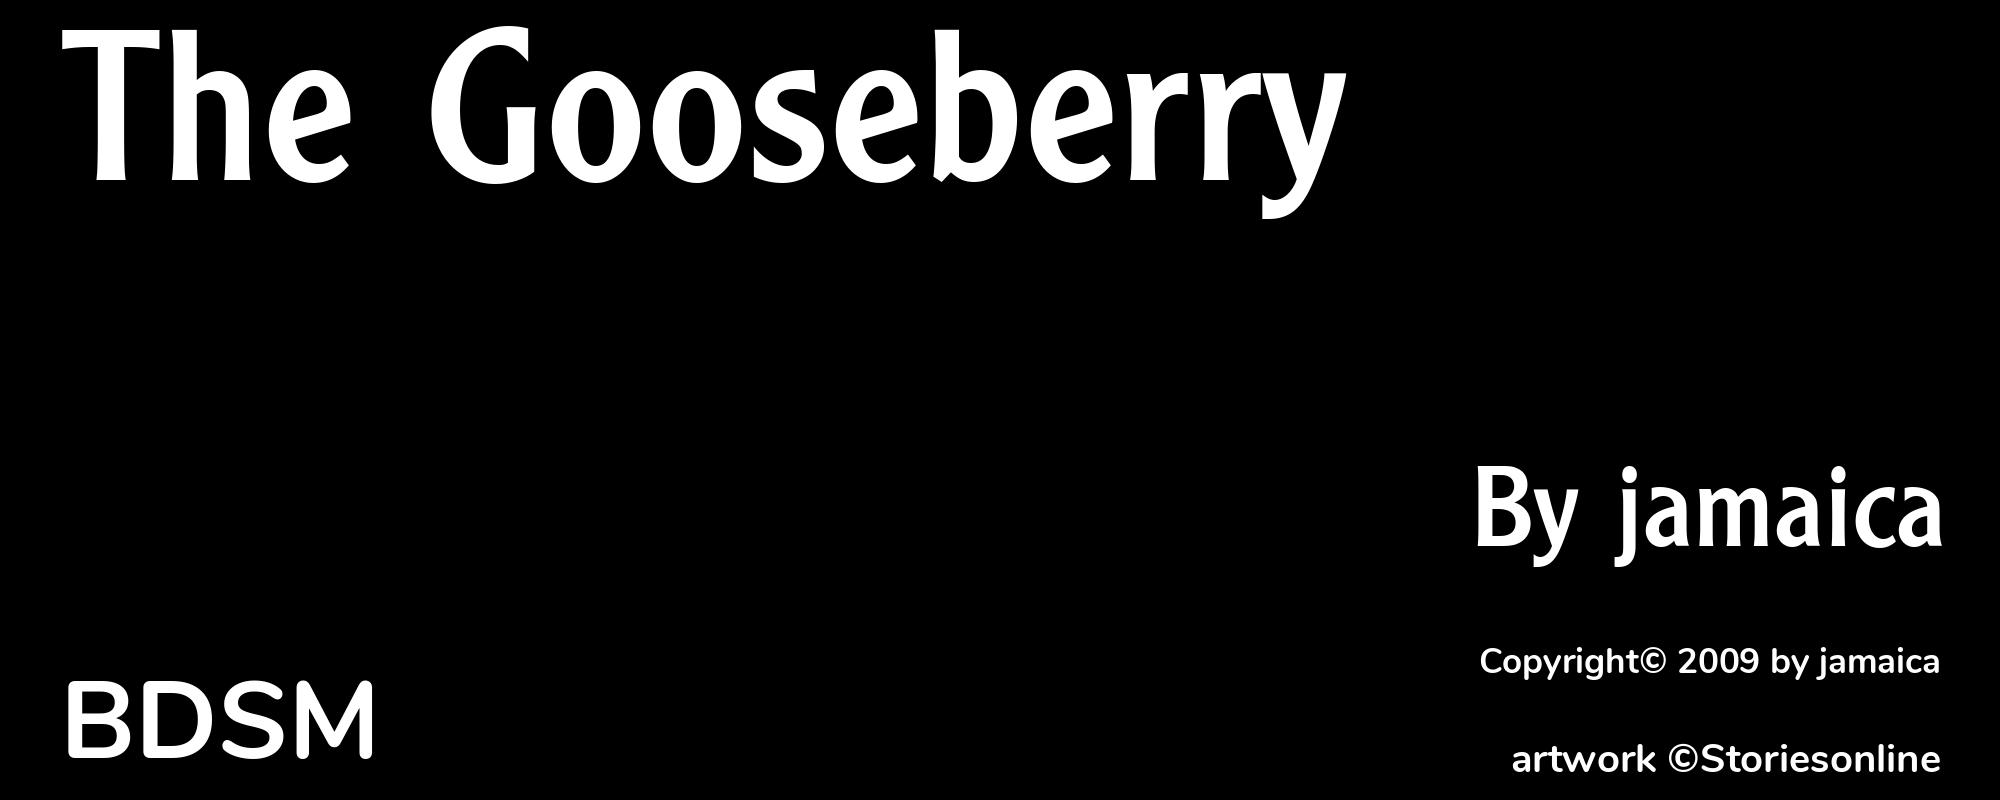 The Gooseberry - Cover